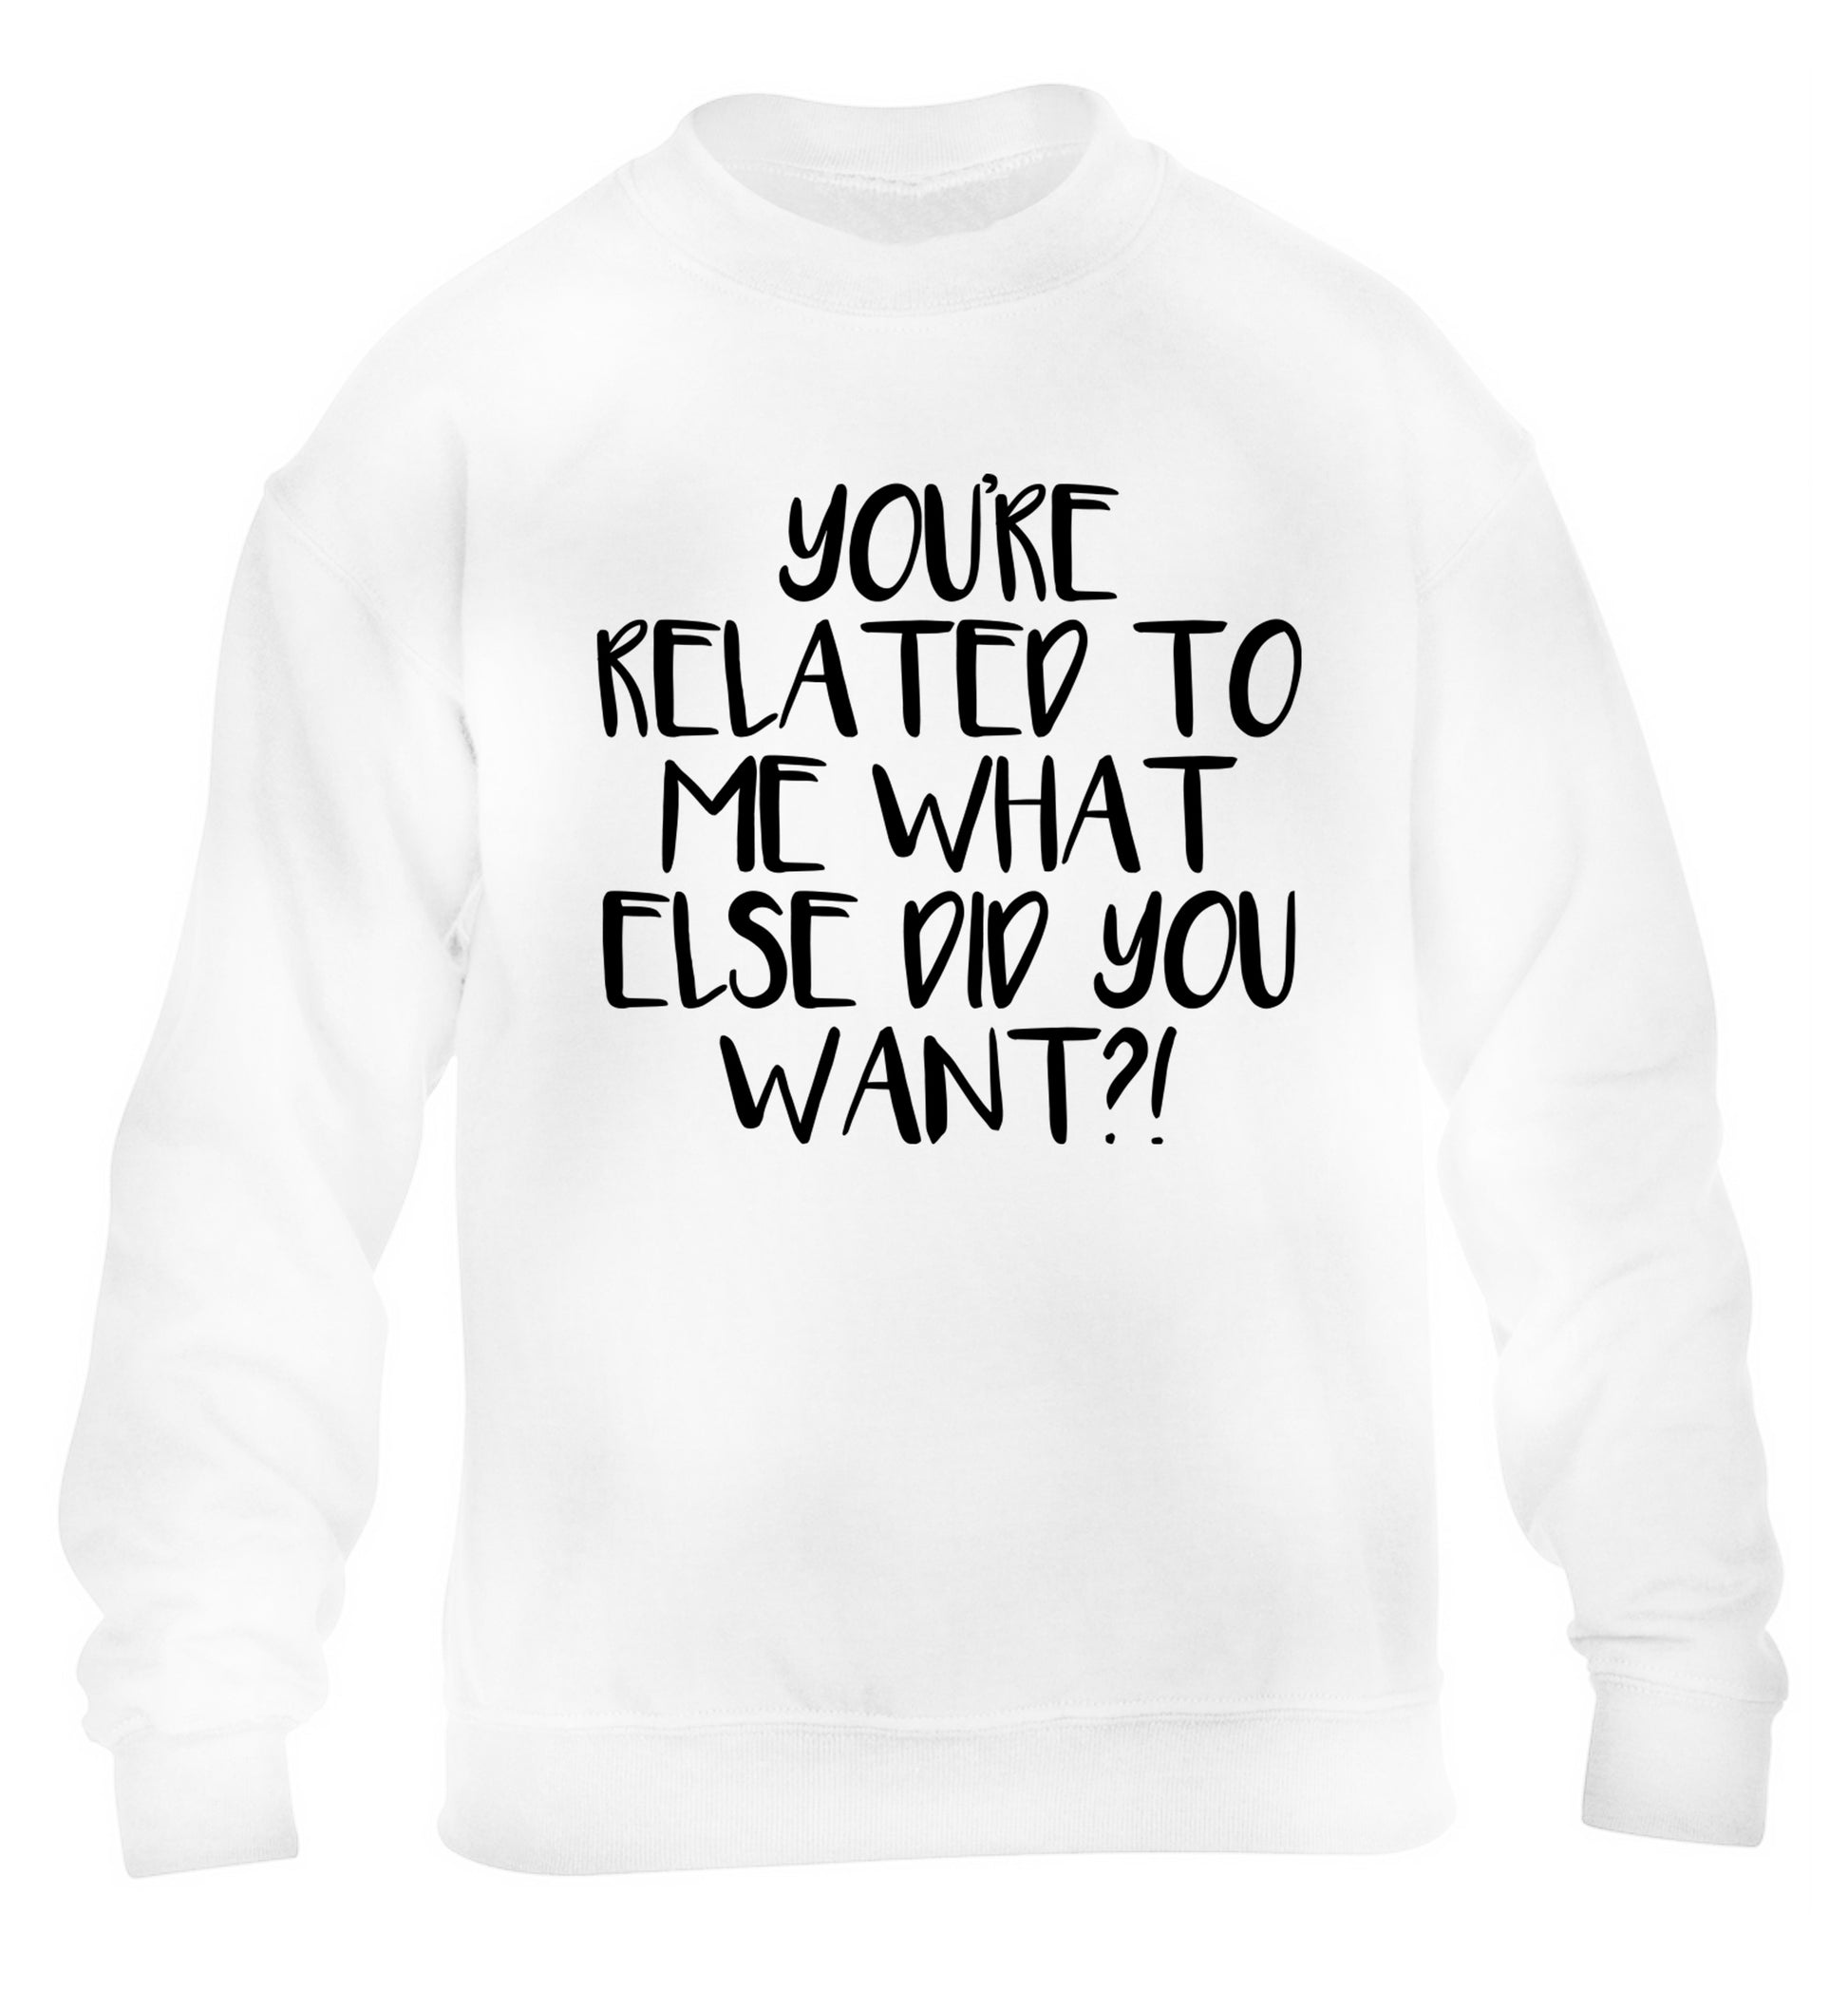 You're related to me what more do you want? children's white sweater 12-13 Years